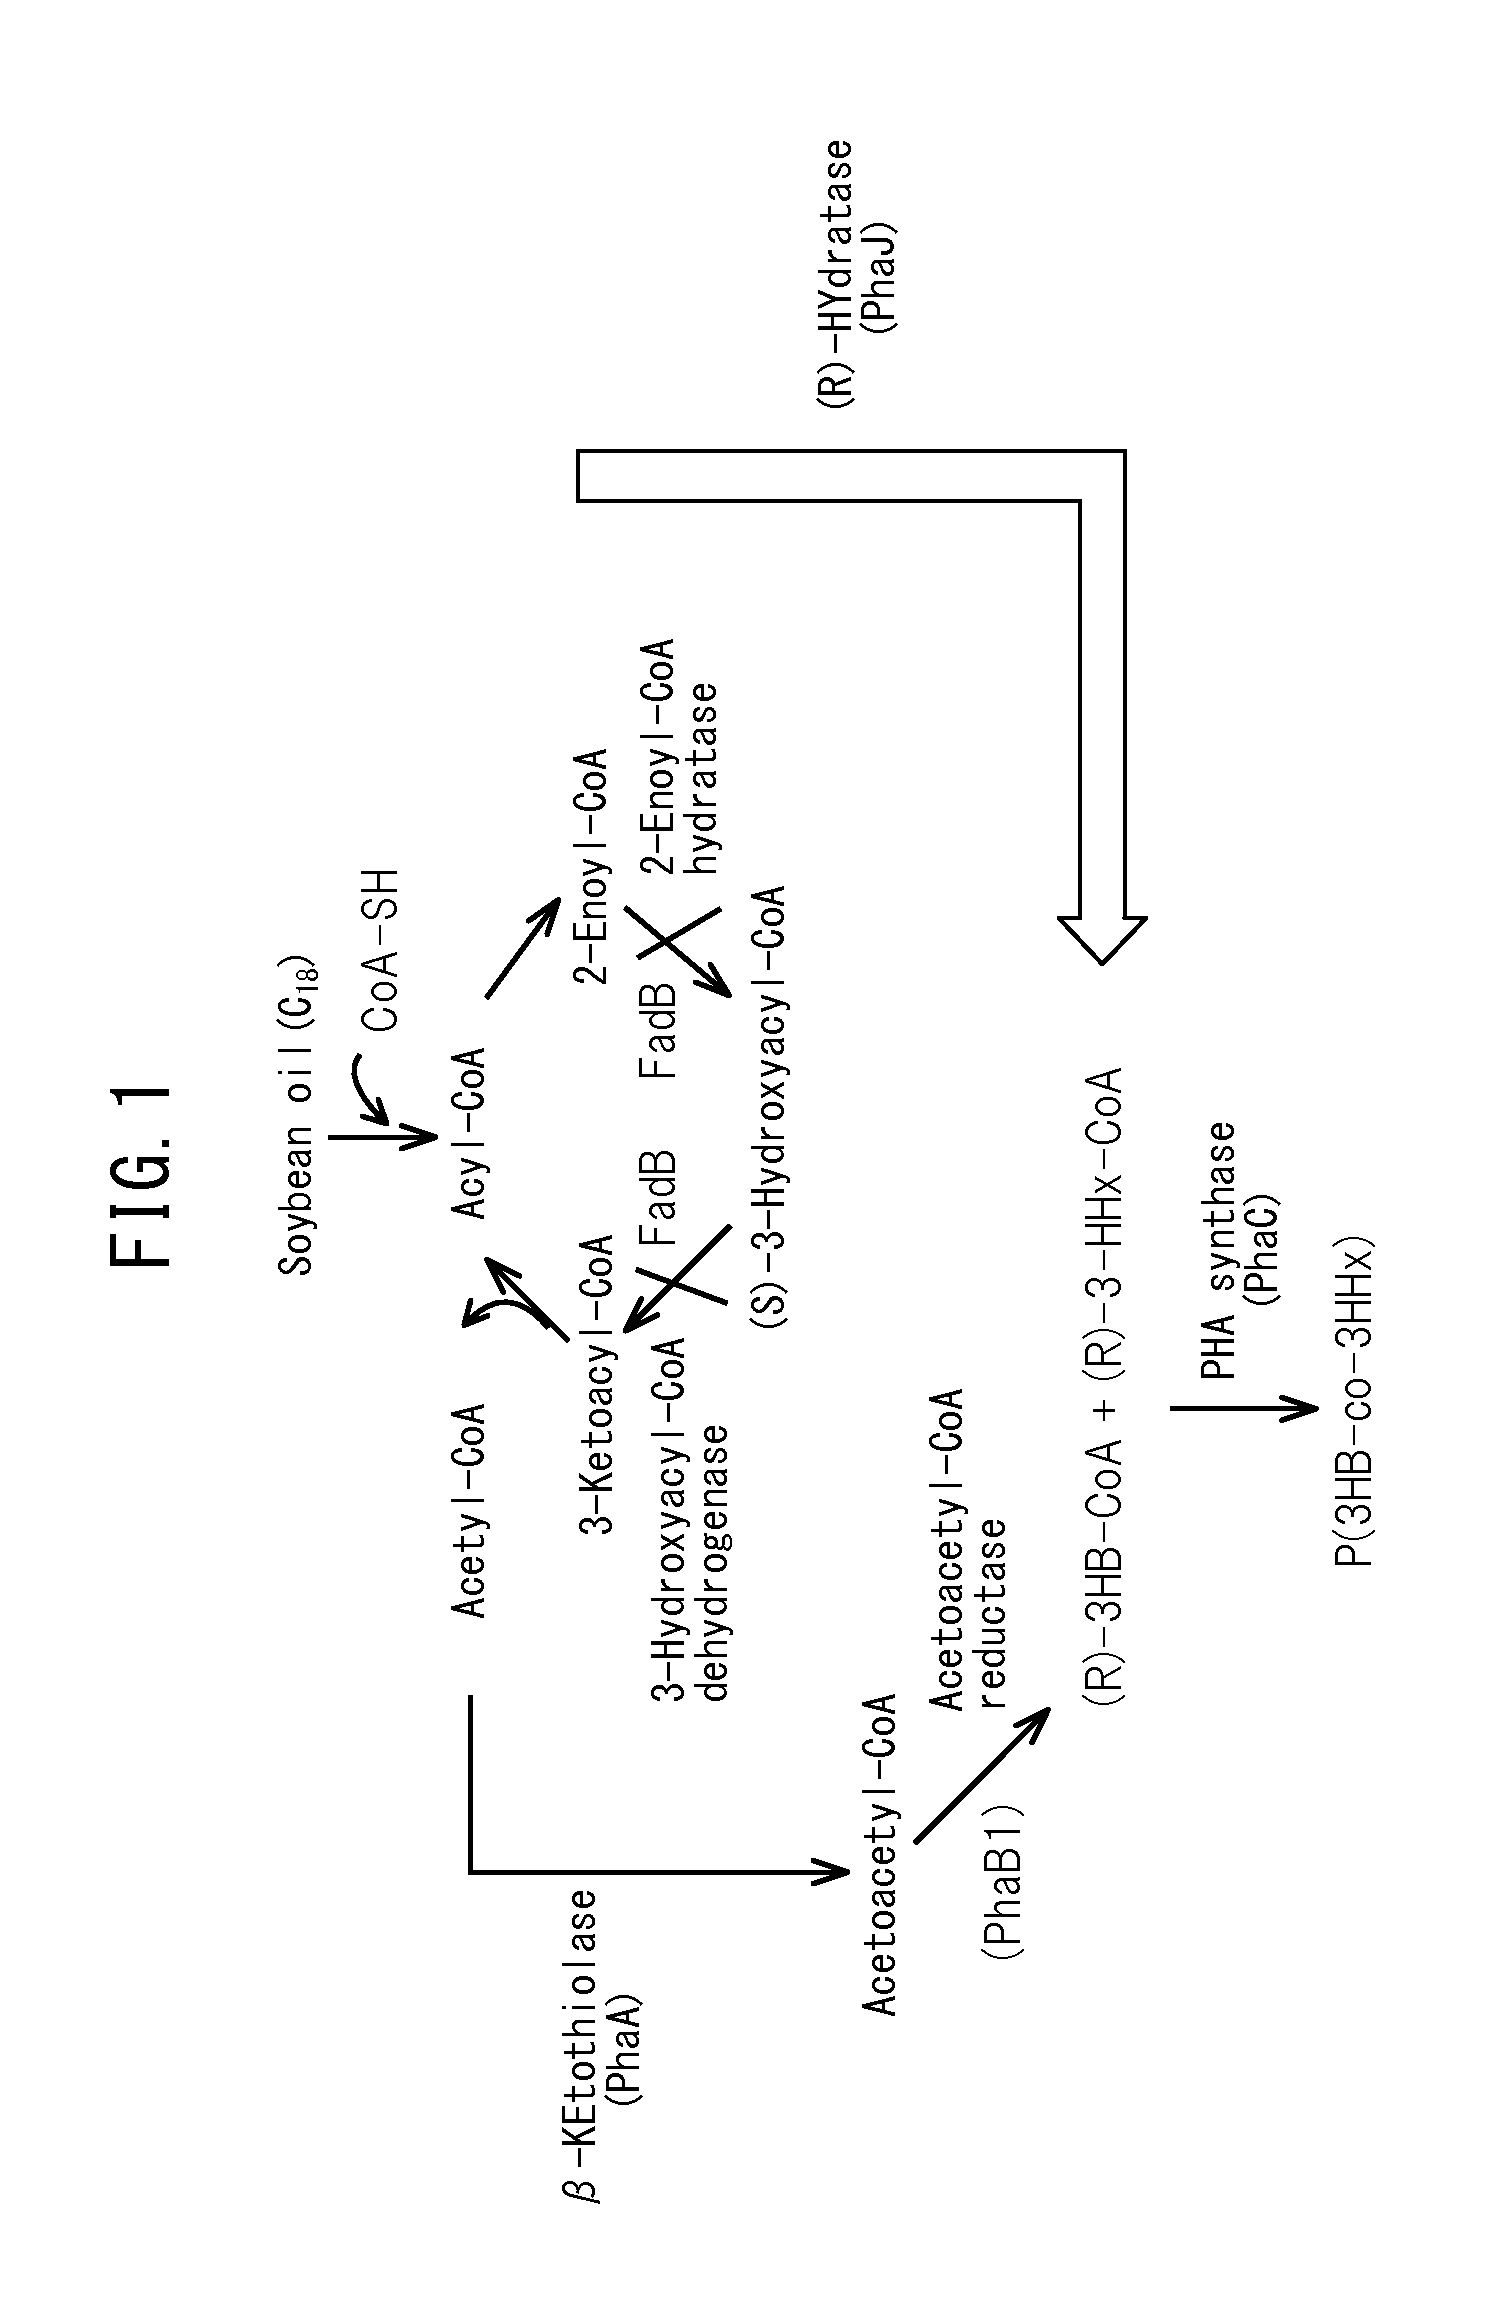 Production method for copolymer polyhydroxyalkanoate using genetically modified strain of fatty acid ß-oxidation pathway